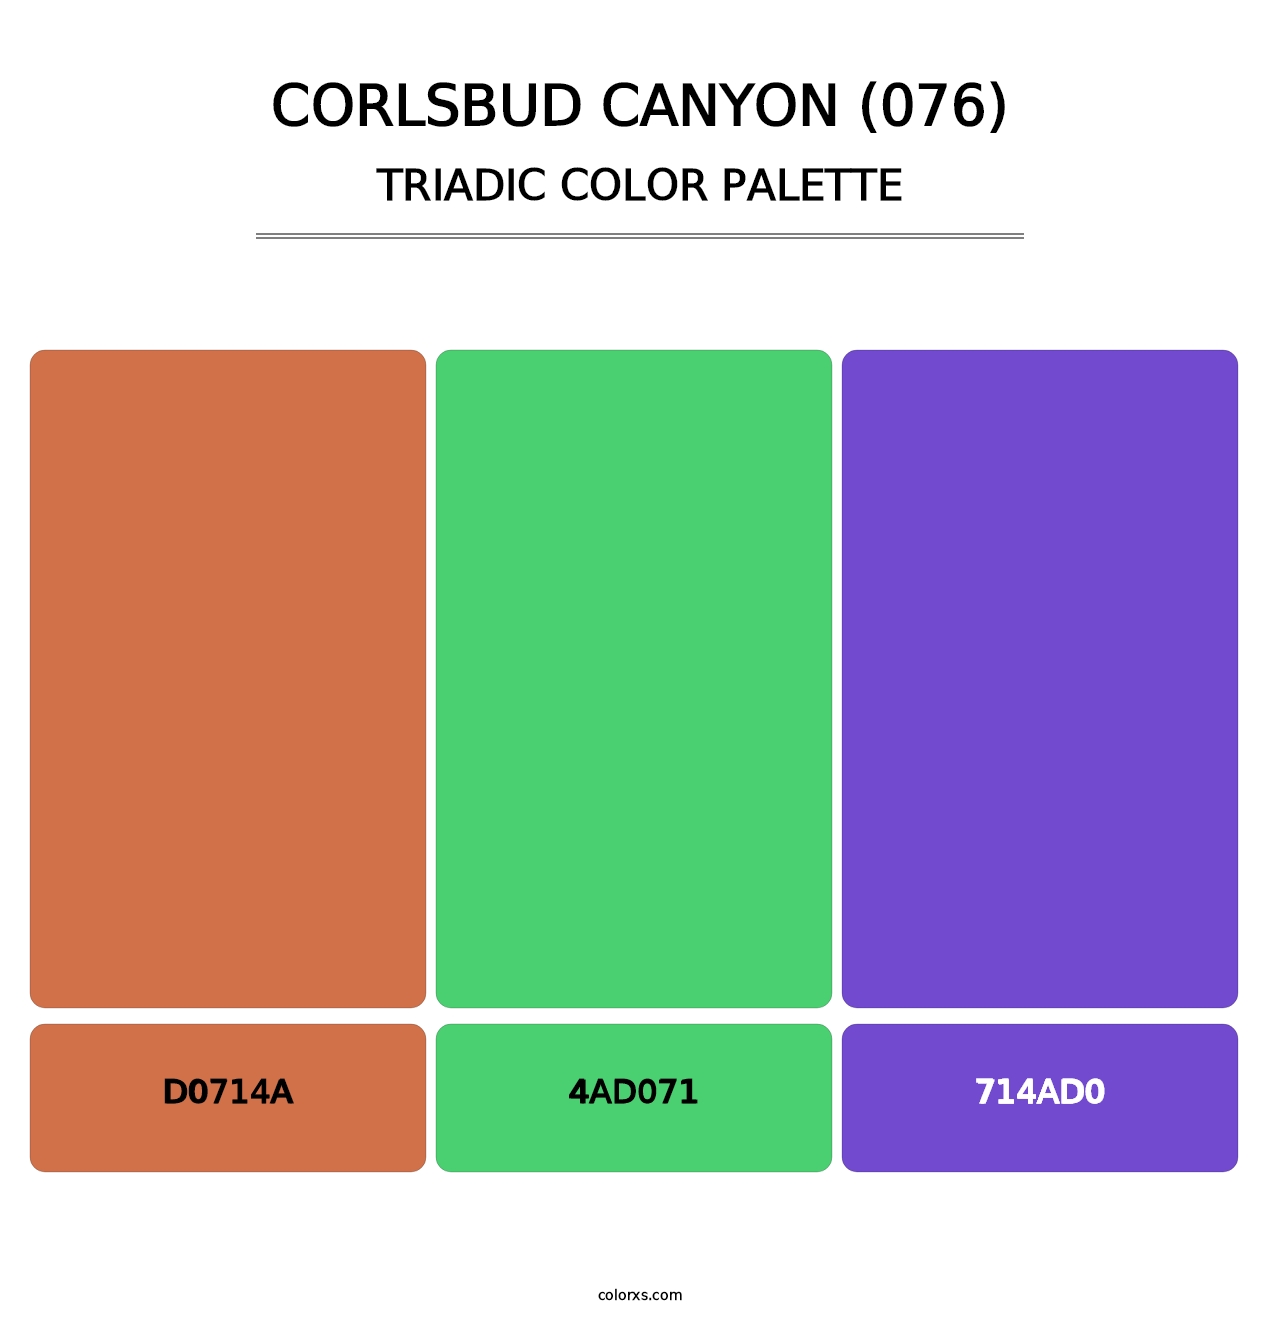 Corlsbud Canyon (076) - Triadic Color Palette